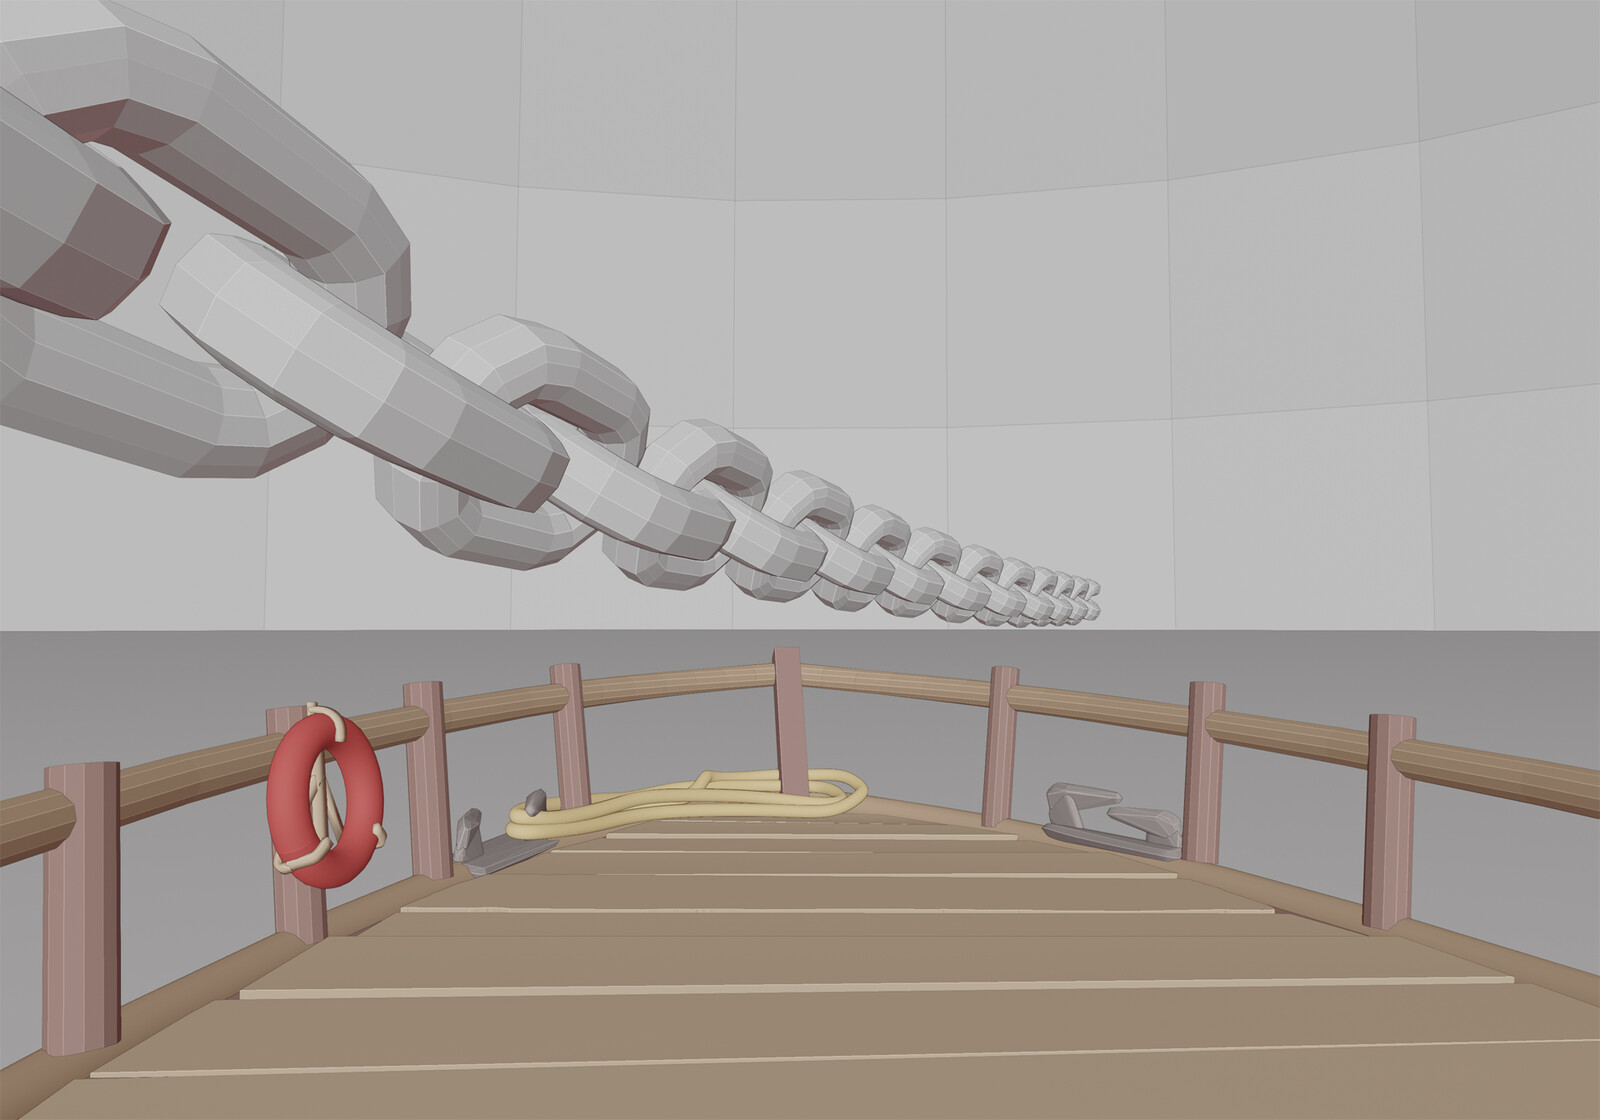 The scene was built in Blender, but the entire foreground boat was made with Gravity Sketch. This also shows a different position for the chain, before the client asked for it to be moved higher.